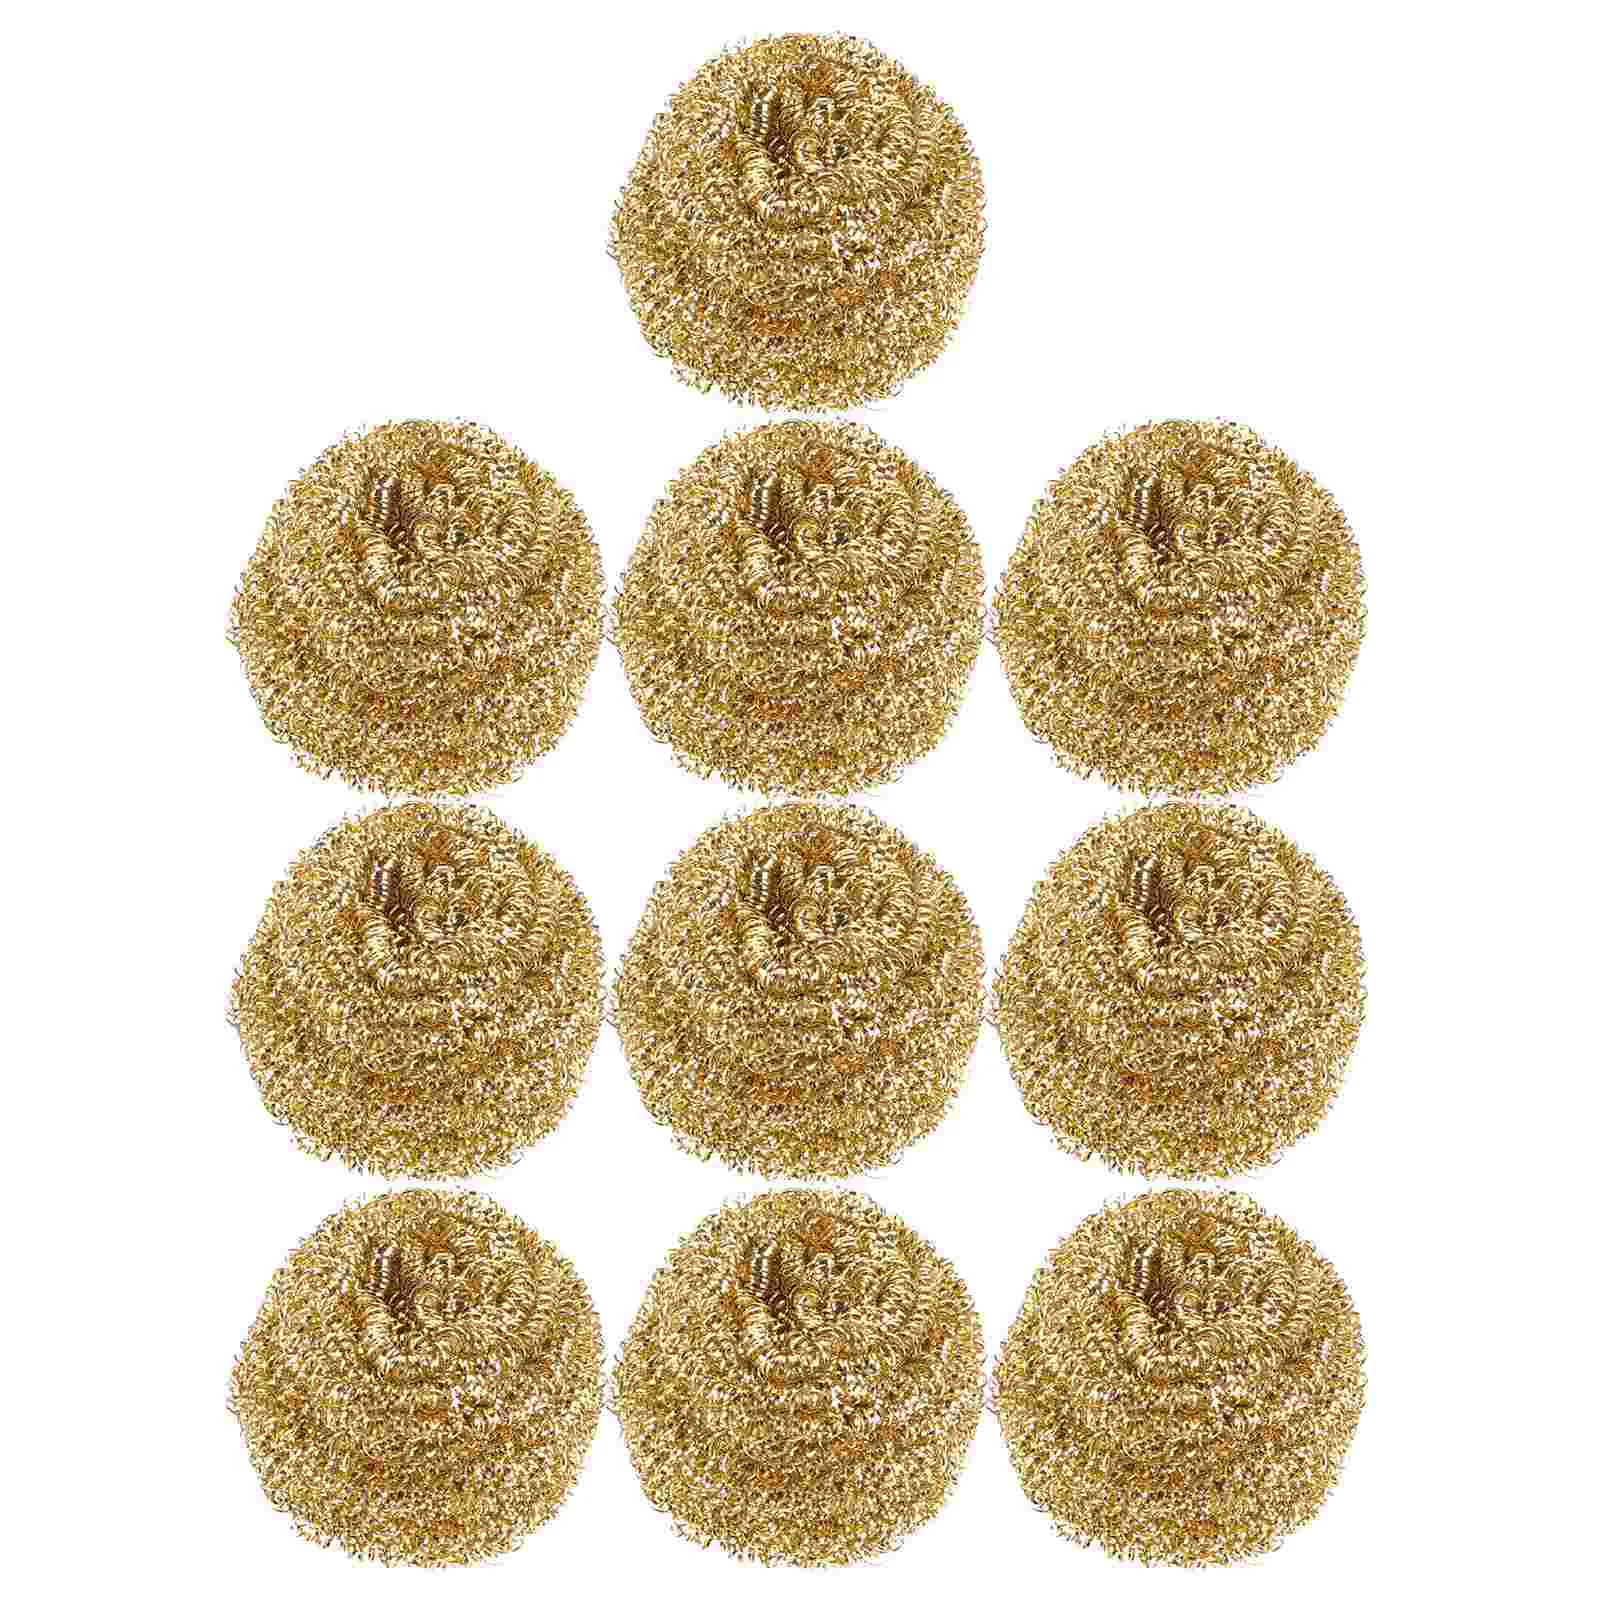 

10 Pcs Sponge Cleaner for Solder Irons Soldering Tip Cleaning Ball Detergent Wire Brass Nozzle